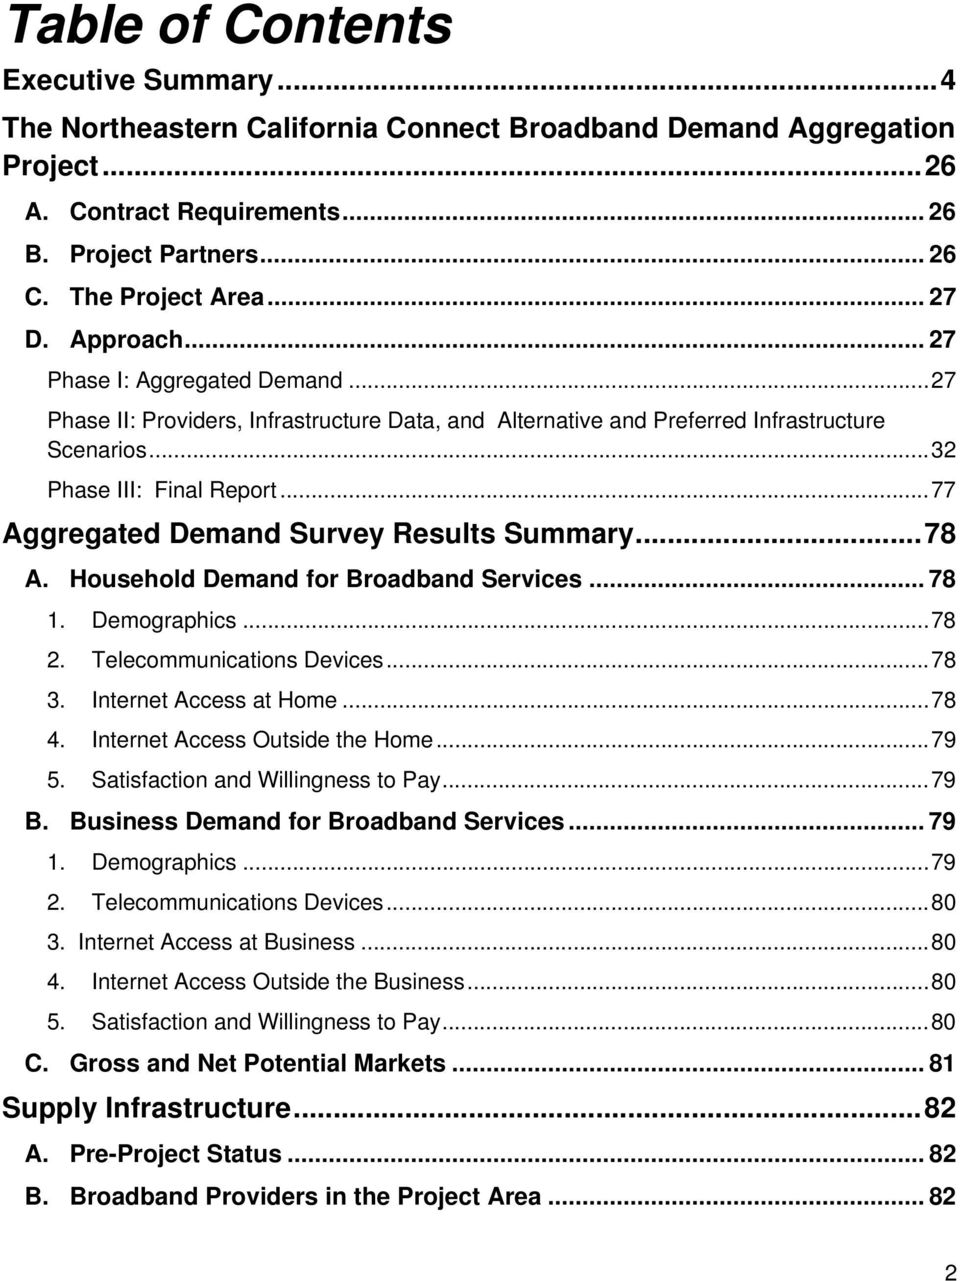 .. 77 Aggregated Demand Survey Results Summary... 78 A. Household Demand for Broadband Services... 78 1. Demographics... 78 2. Telecommunications Devices... 78 3. Internet Access at Home... 78 4.